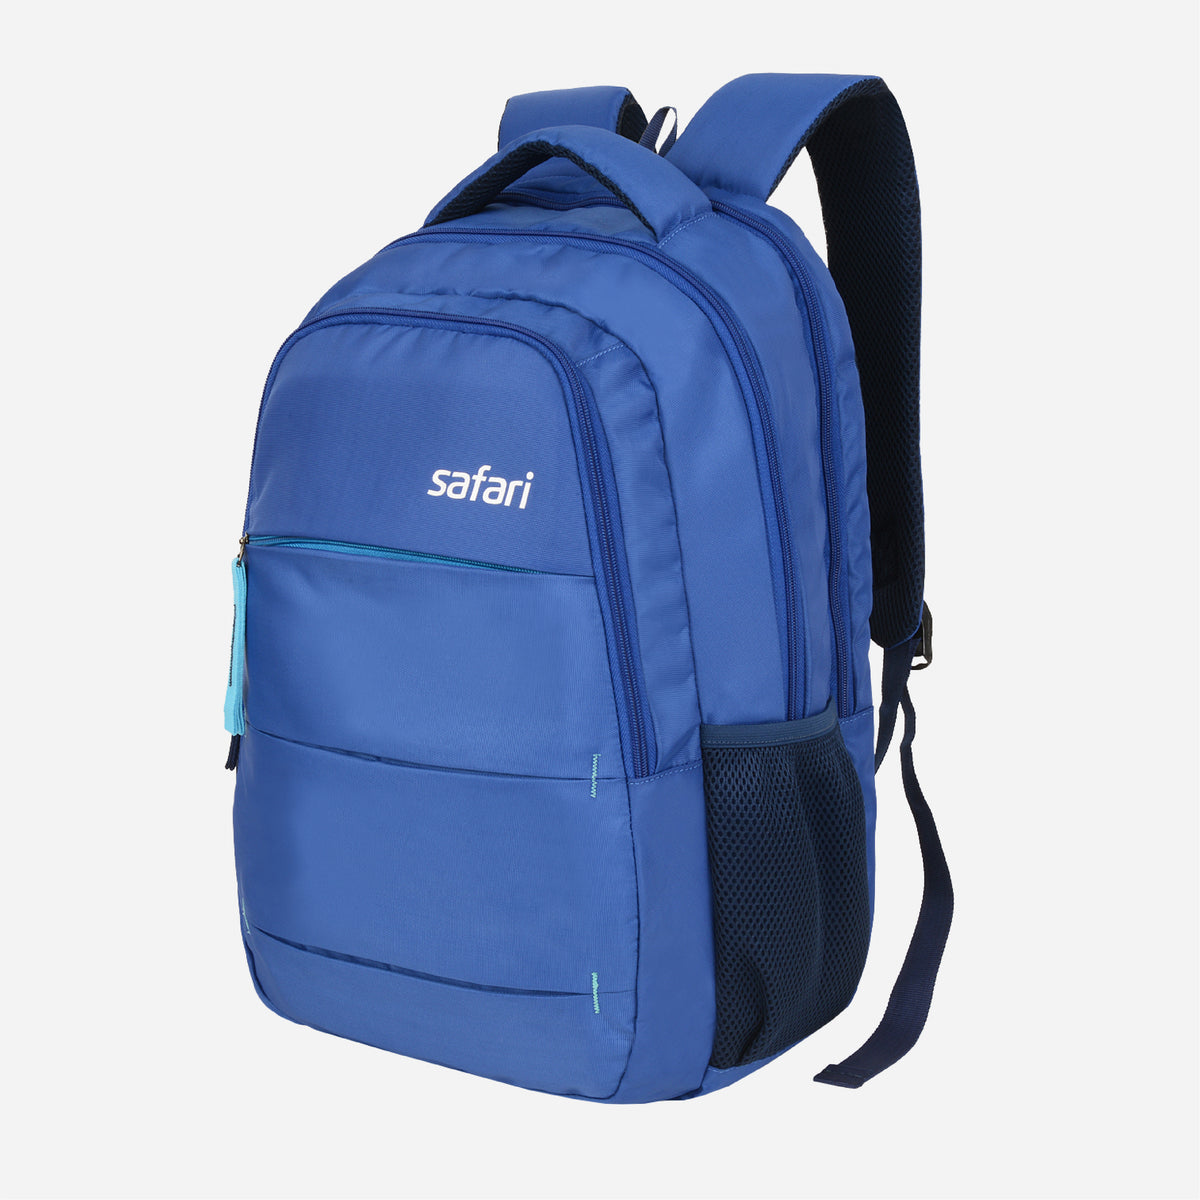 Promotional Custom College Institute Laptop Bags (Backpack) at Rs 130/piece  | Promotional Laptop Bag in Delhi | ID: 21029182348